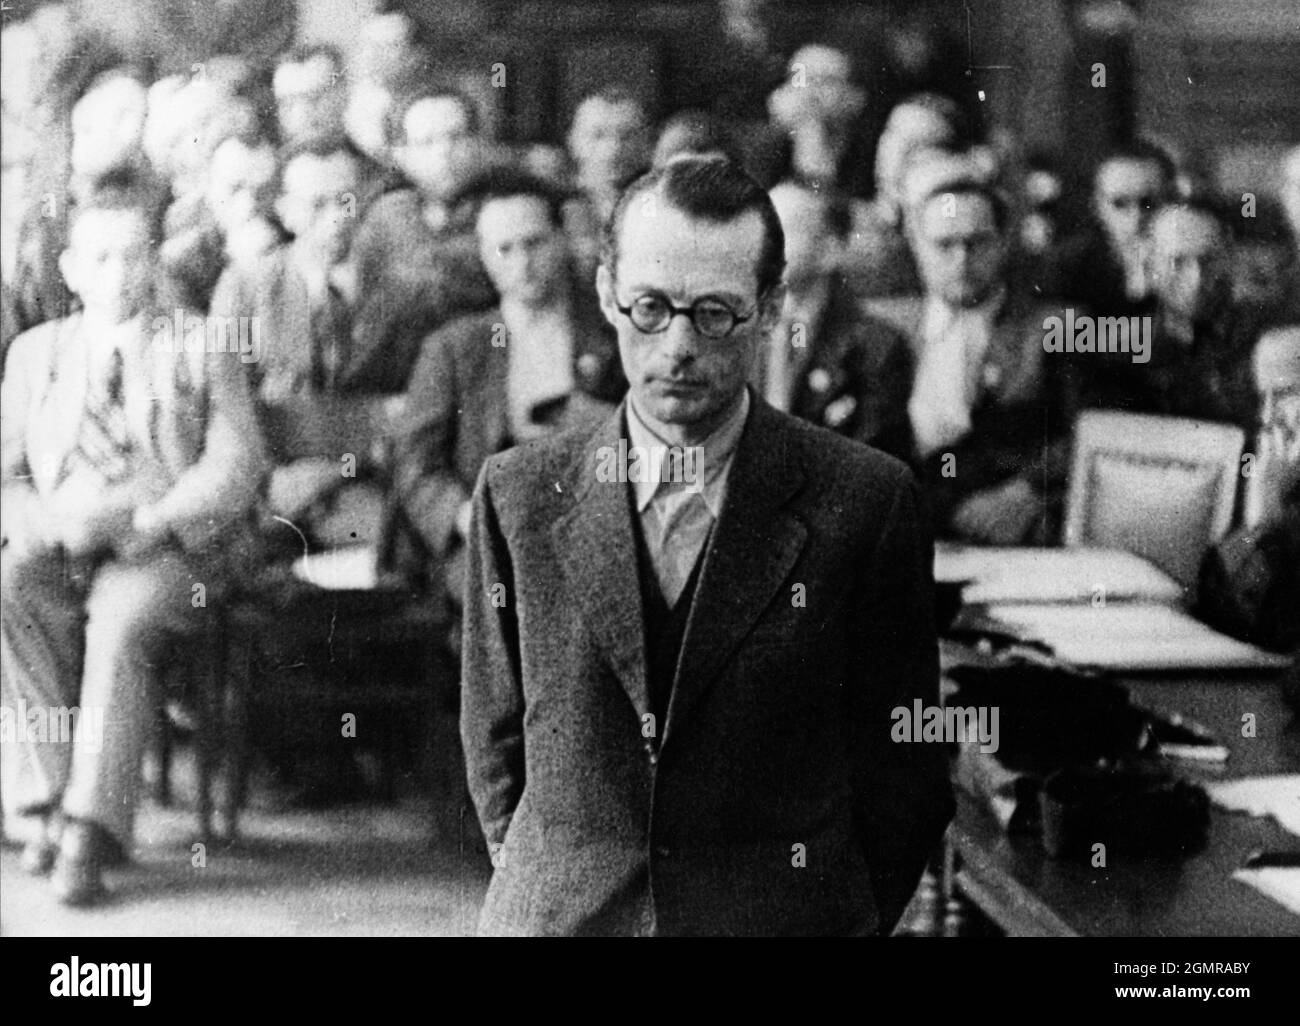 circa August 1944 - Berlin, Germany - Nazi resistance leader Count ULRICH WILHEIM GRAF SCHWERIN VON SCHWANENFELD during his trial for his involvement in the failed July 20, 1944 attack to assassinate Hitler. Exact date unknown. Credit: Keystone Press Agency/ZUMA Wire/Alamy Live News Stock Photo